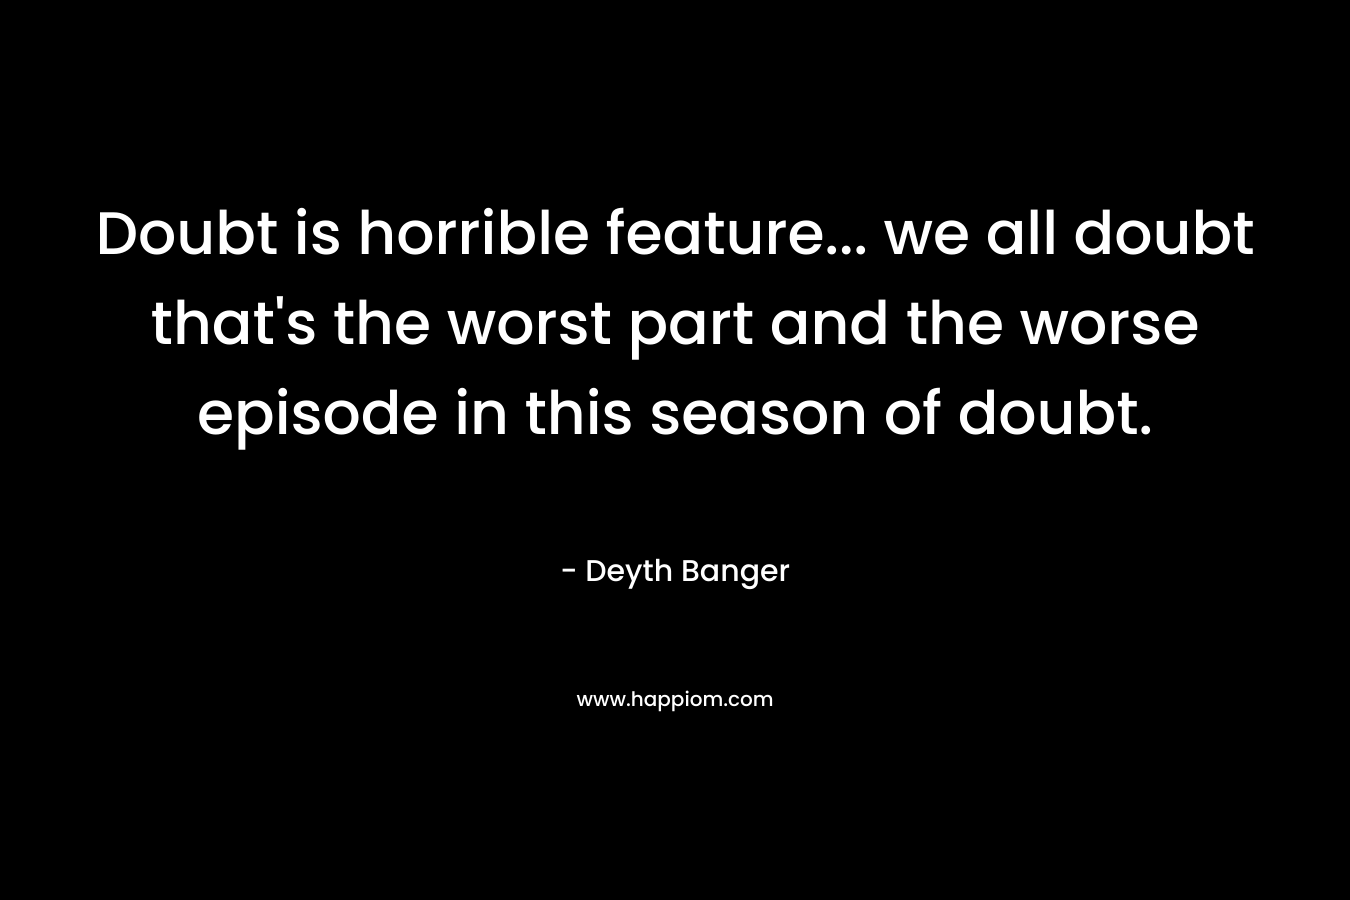 Doubt is horrible feature... we all doubt that's the worst part and the worse episode in this season of doubt.